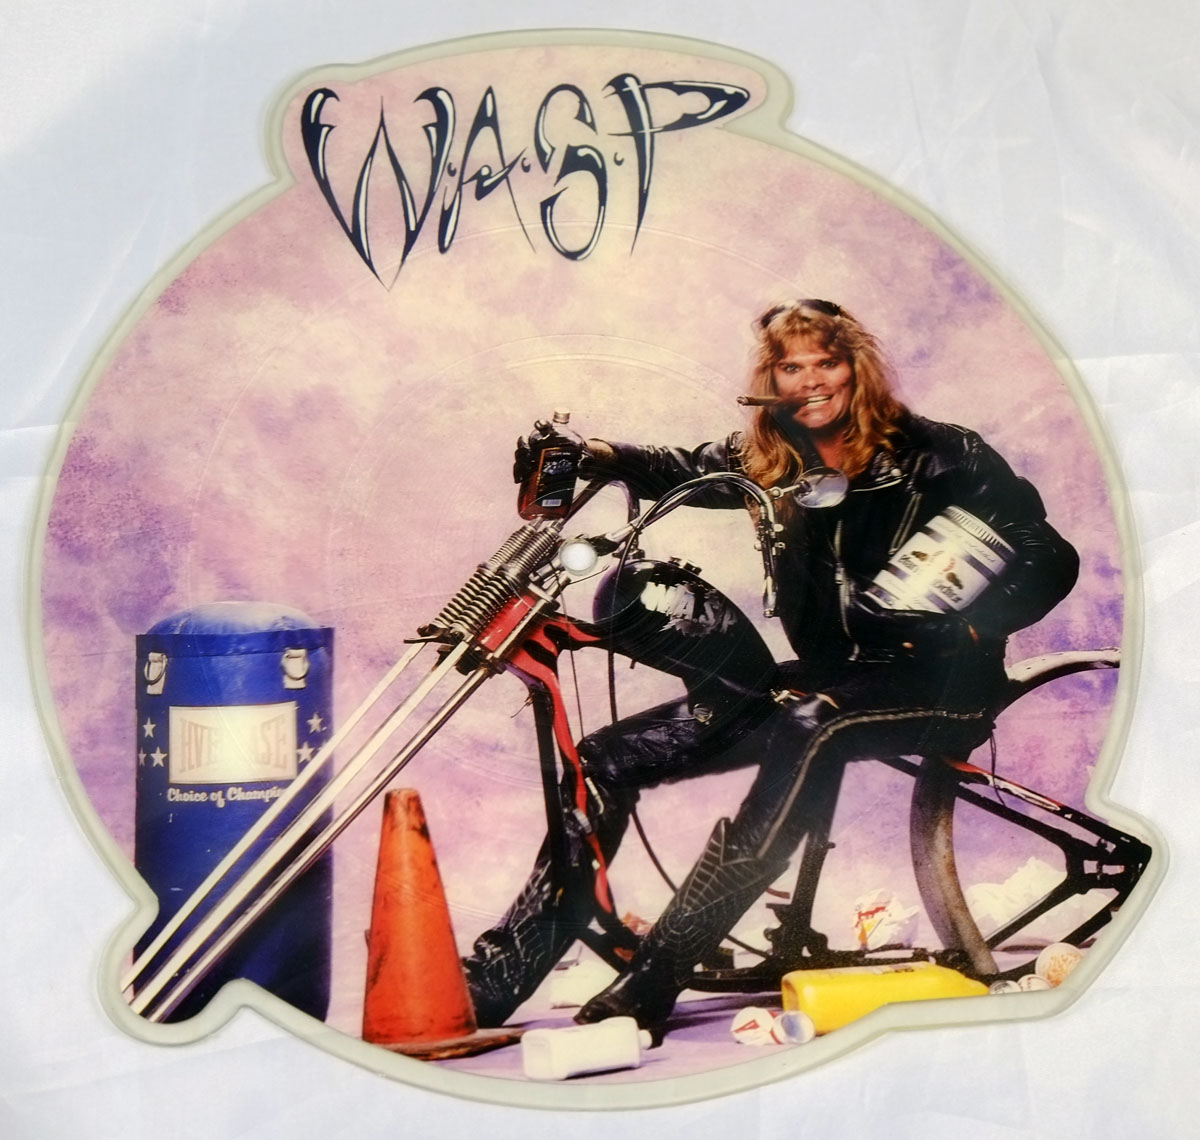 High Resolution Photos of wasp mean man picture disc 